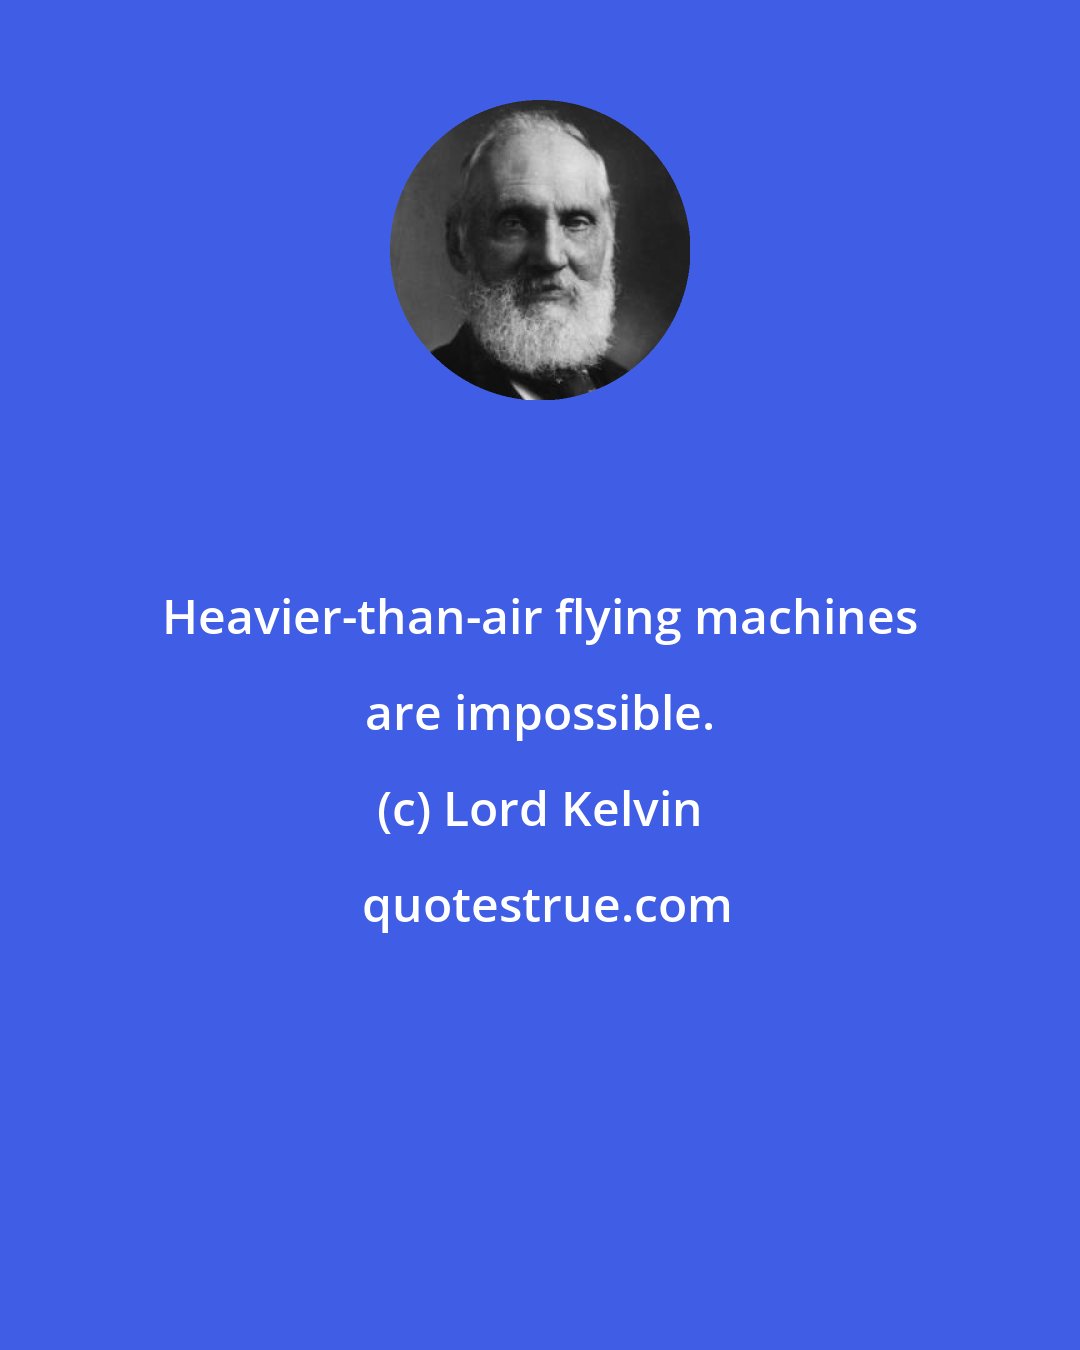 Lord Kelvin: Heavier-than-air flying machines are impossible.